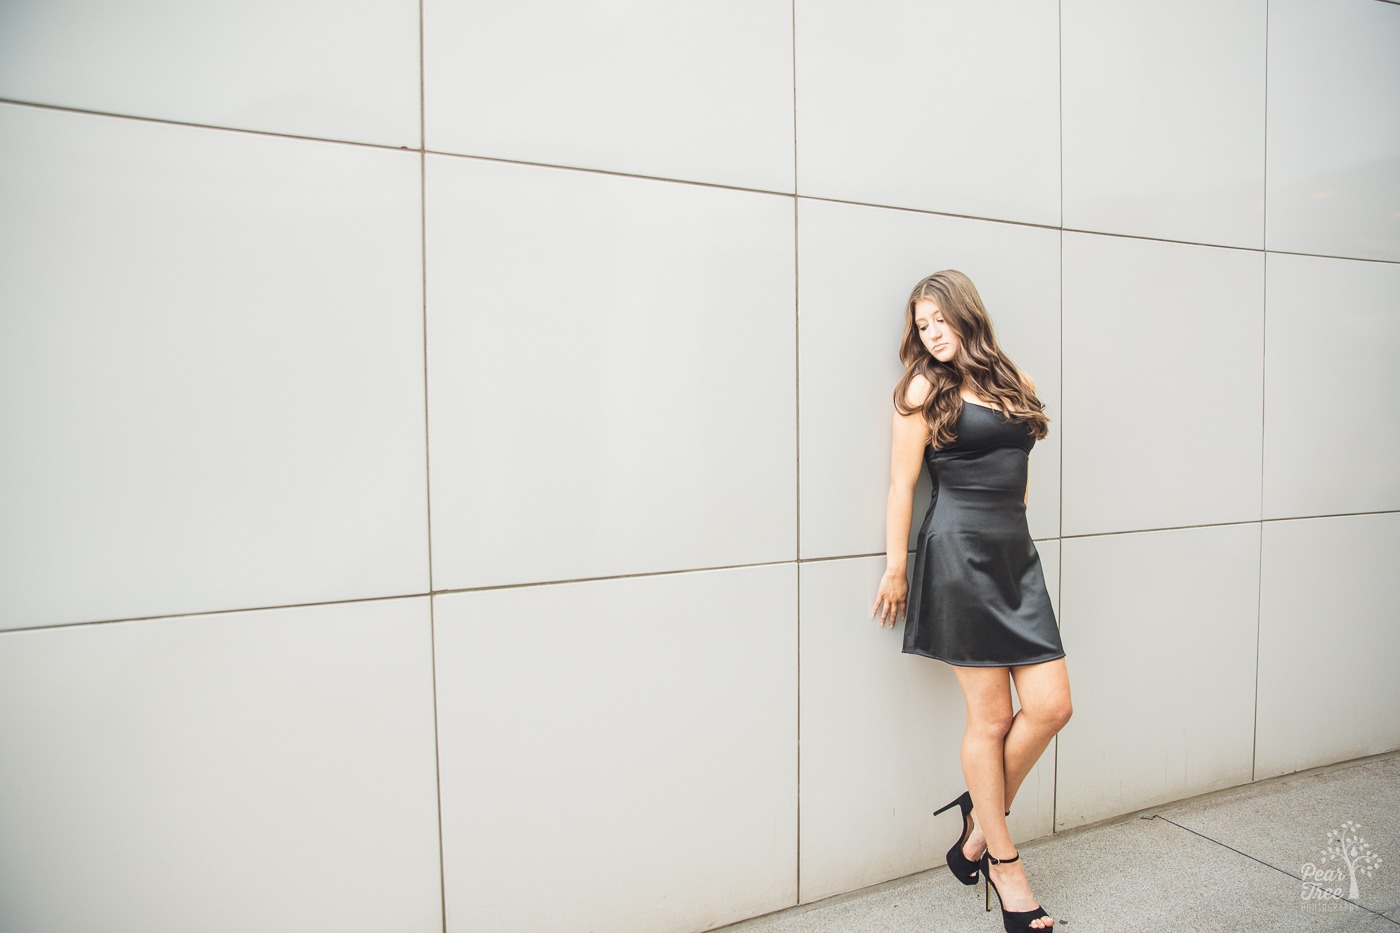 Gorgeous high school senior girl in black silk dress, high heels, and long wavy hair looking away from the camera